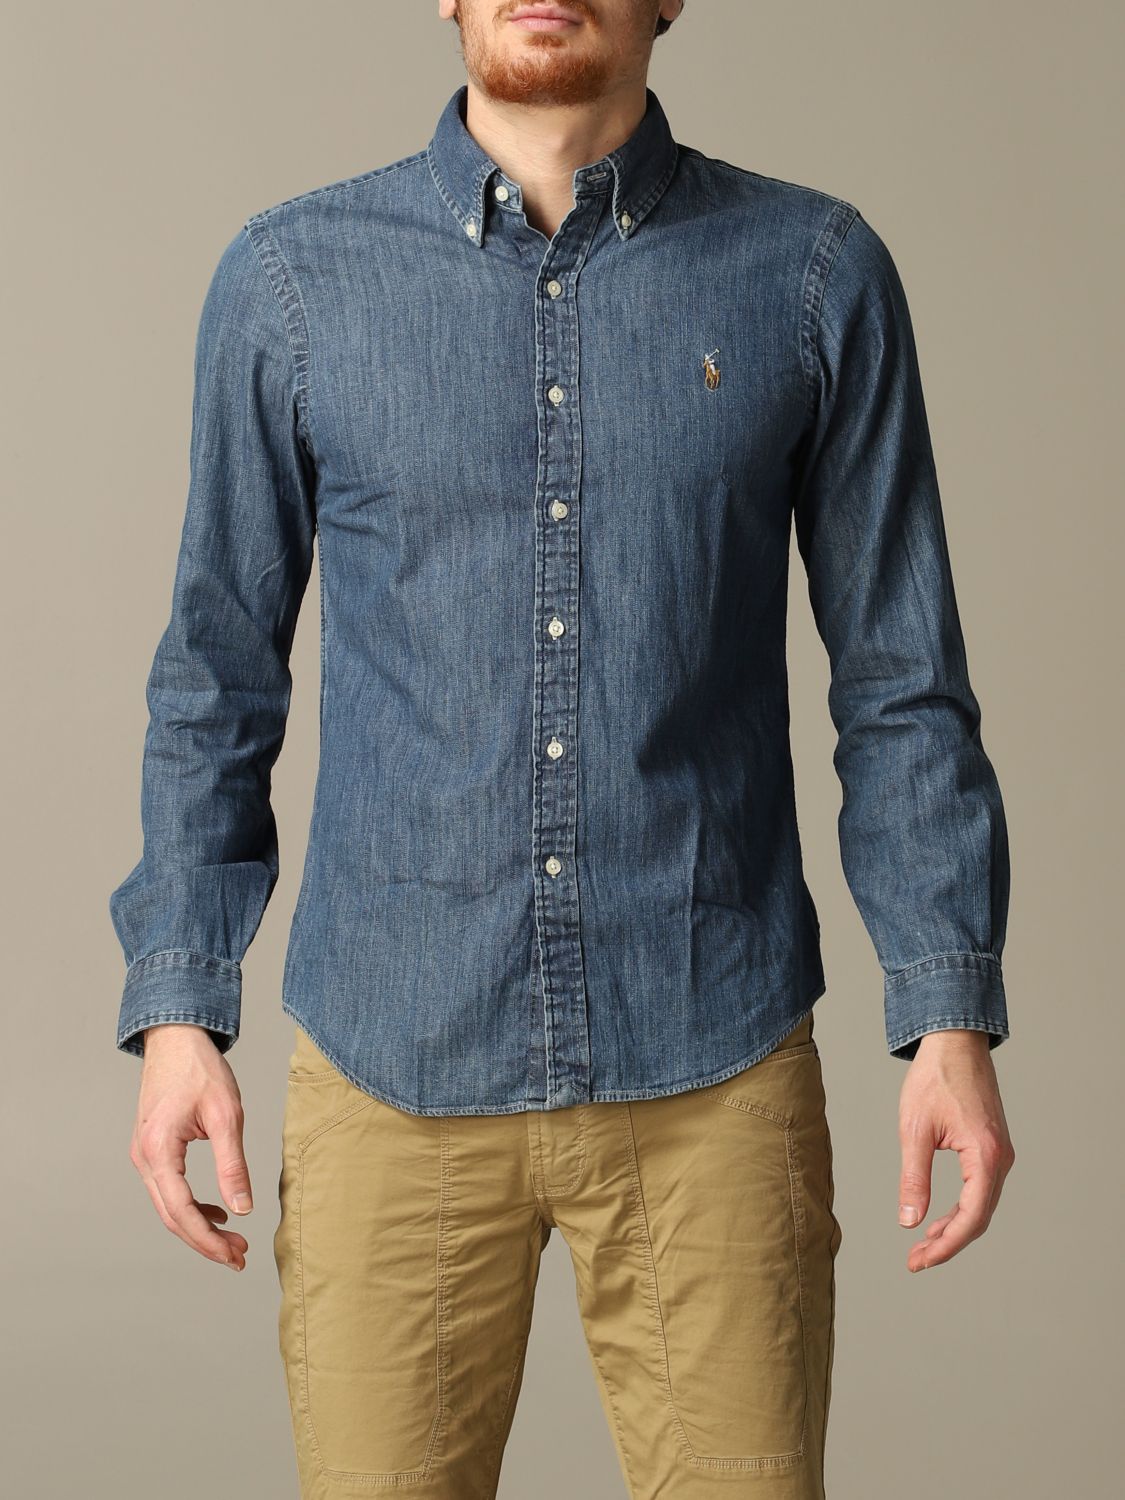 Polo Ralph Lauren Outlet: chambray slim fit shirt - Denim | Polo Ralph  Lauren shirt 710548539 online on 